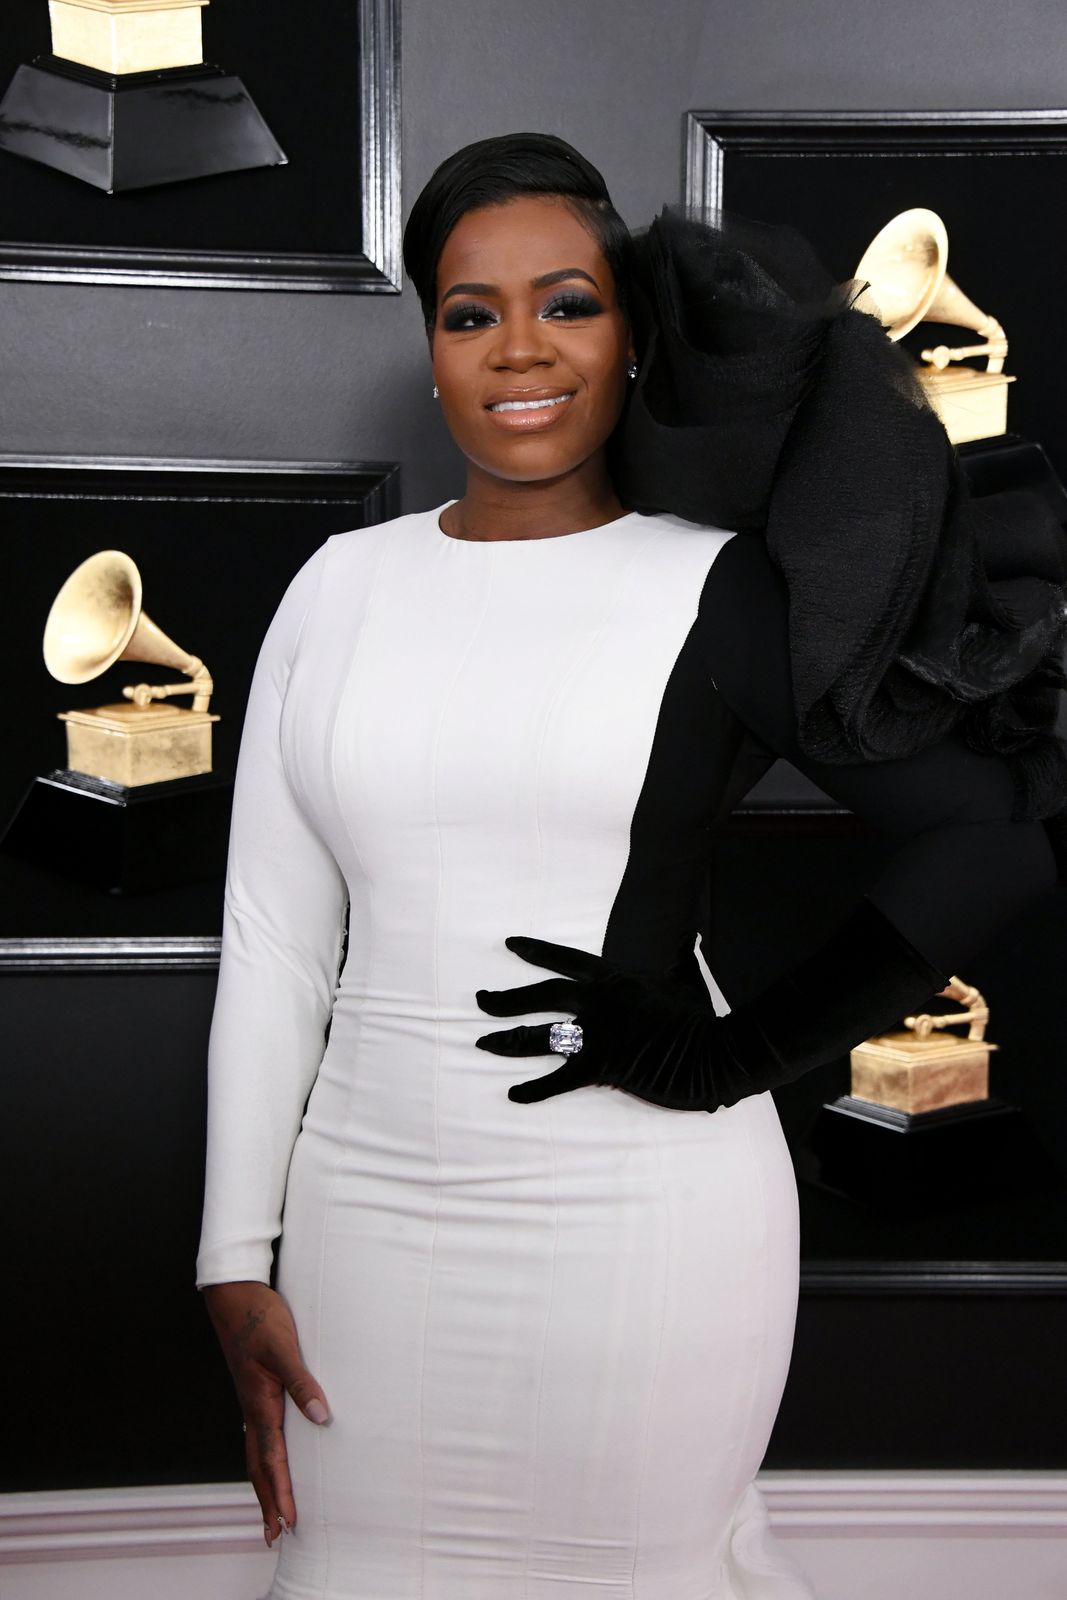 Fantasia Barrino at the 61st Annual Grammy Awards at Staples Center on February 10, 2019. | Source: Getty Images